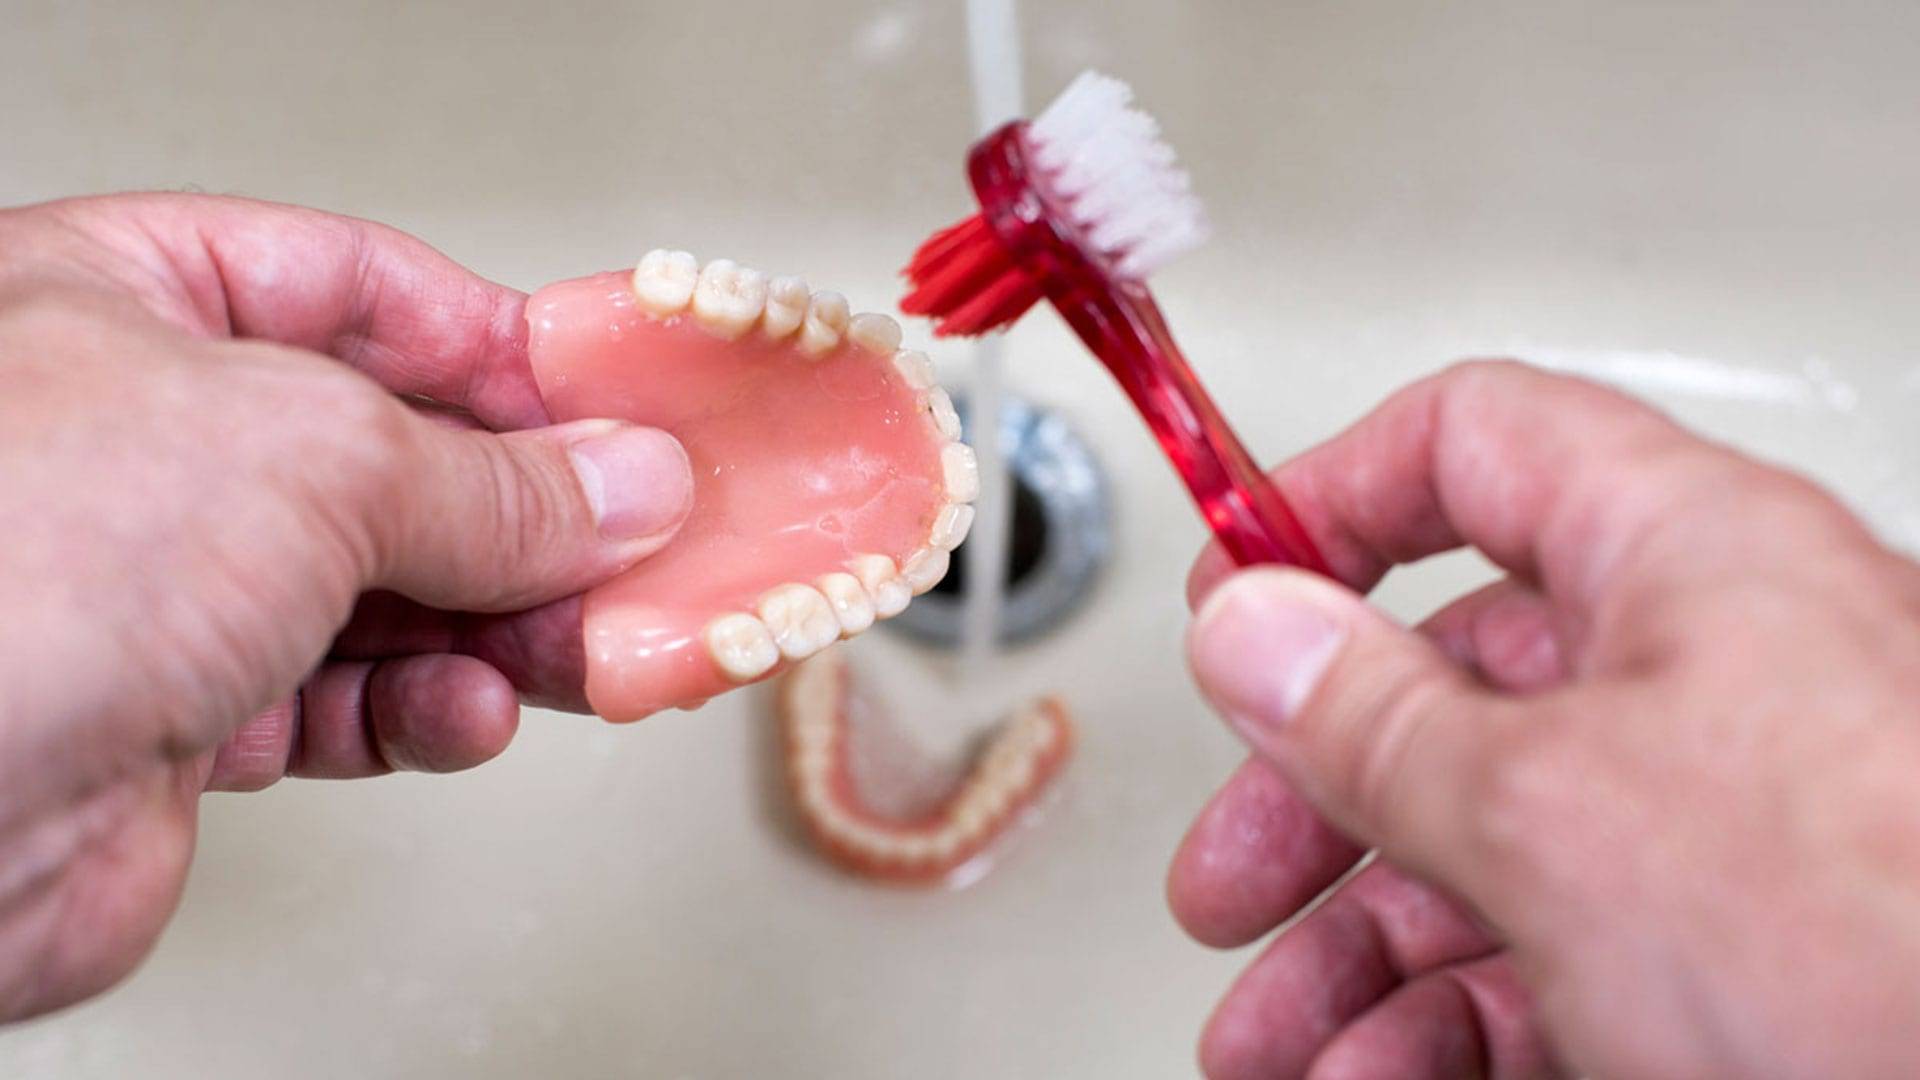 The Dental and Denture Care Center, Cleaning Your Dentures